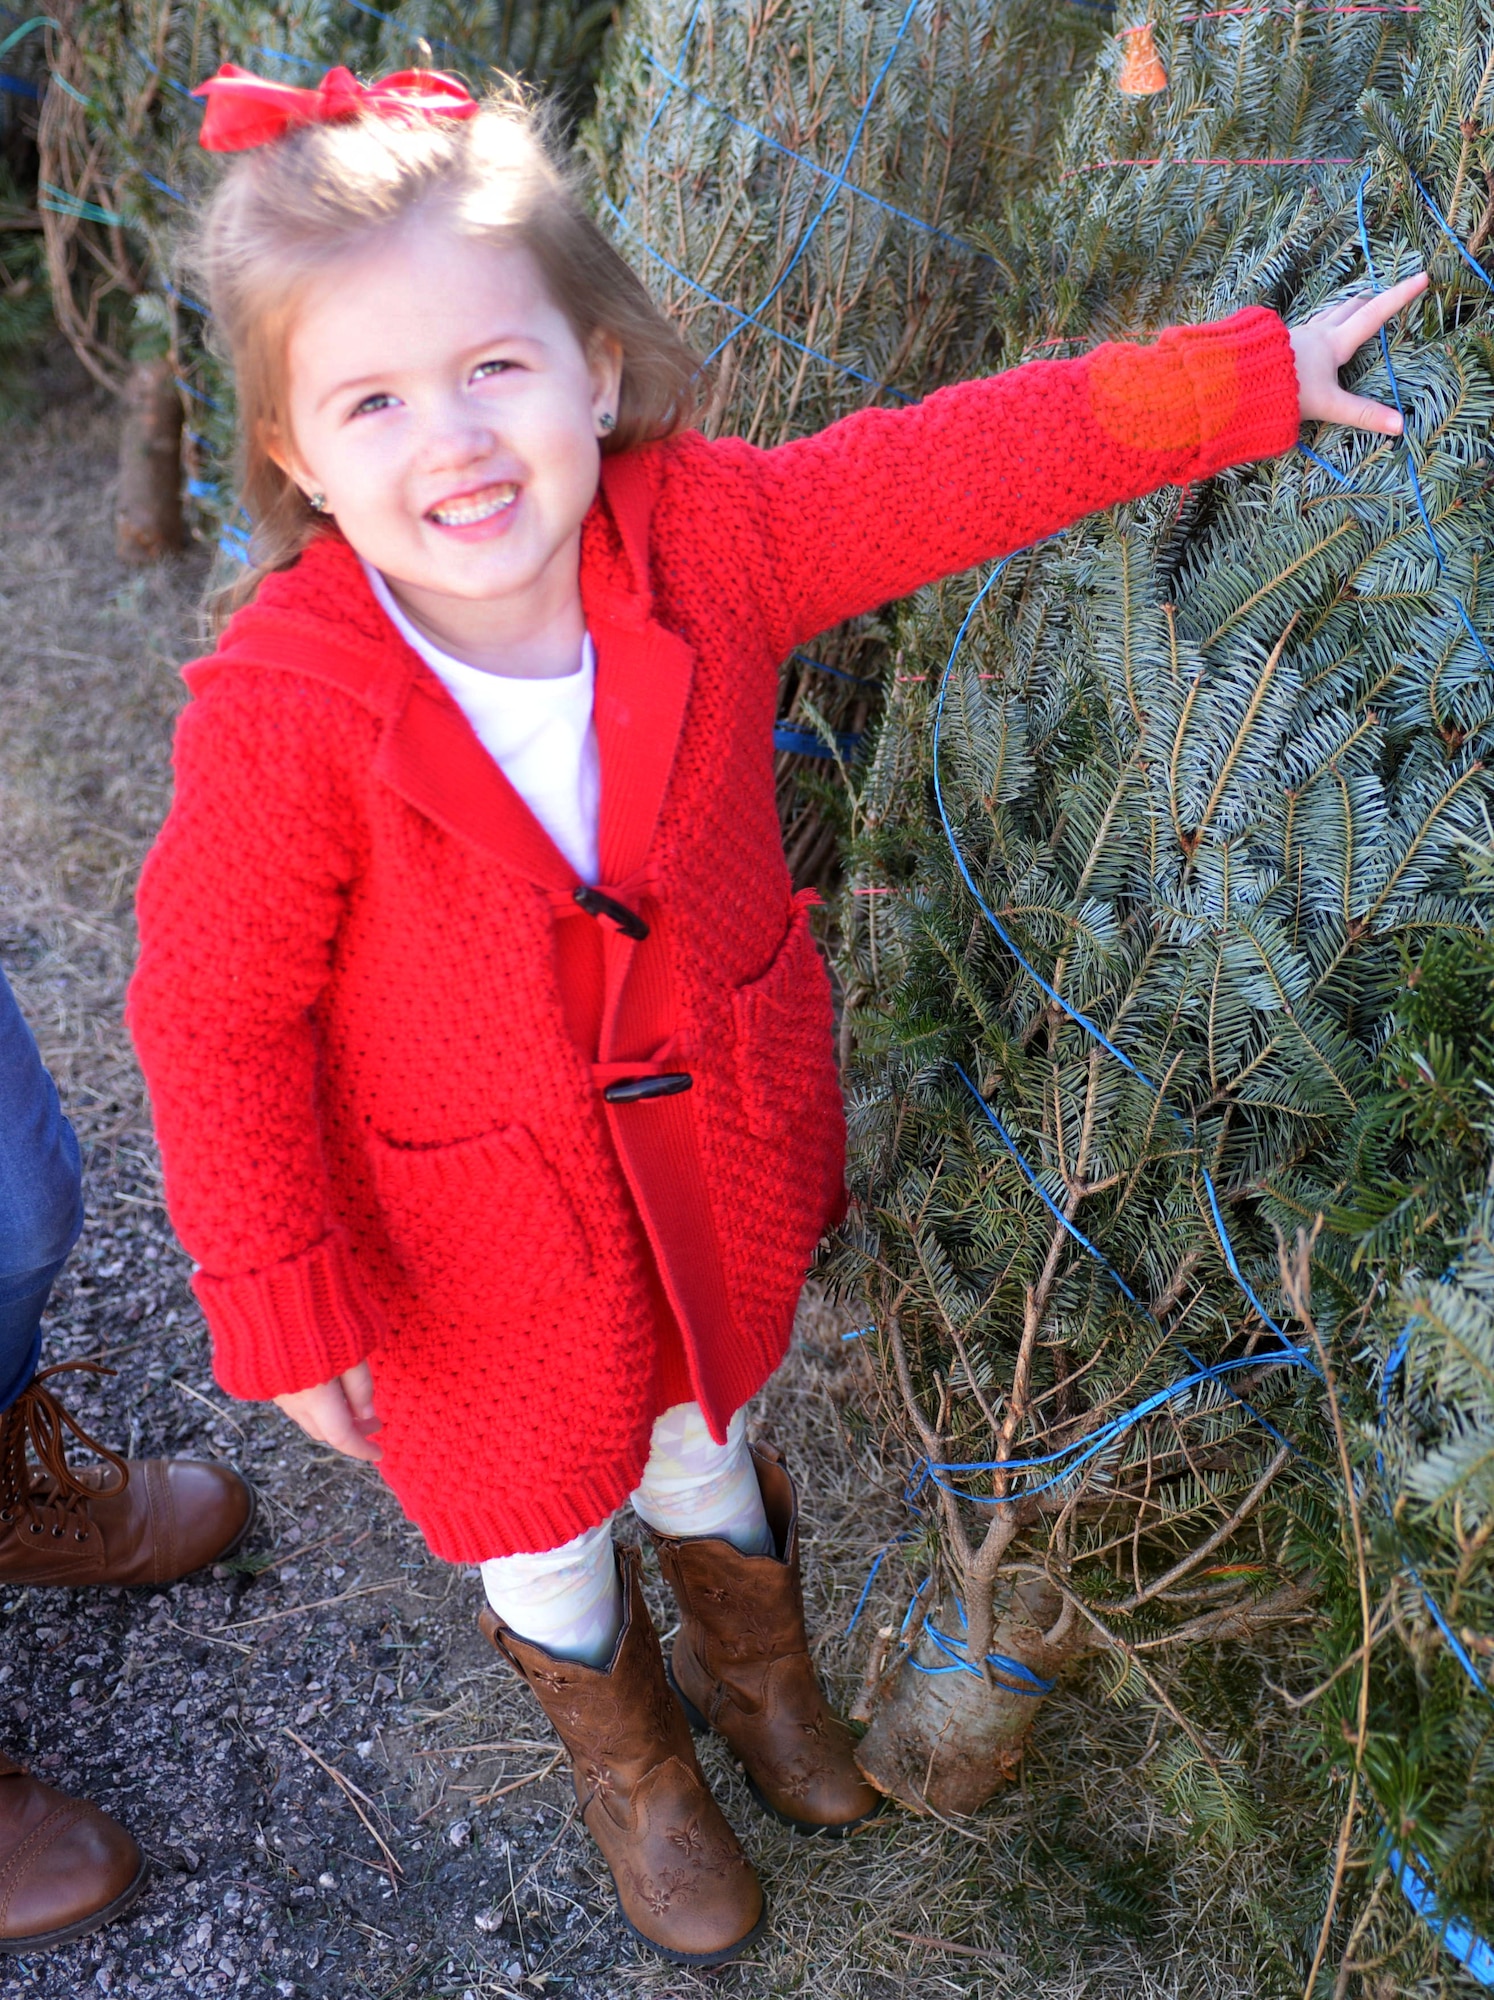 Allyanna Thompson, daughter of Tashina and Senior Airman Jordan Thompson, who is currently serving overseas, smiles as she chooses her favorite Christmas tree during Ellsworth’s ninth annual Trees for Troops event Dec. 2, 2016. Trees for Troops is a national program dedicated to providing military families with real Christmas trees each year during the holiday season. (U.S. Air Force photo by Airman 1st Class Denies M. Jenson)